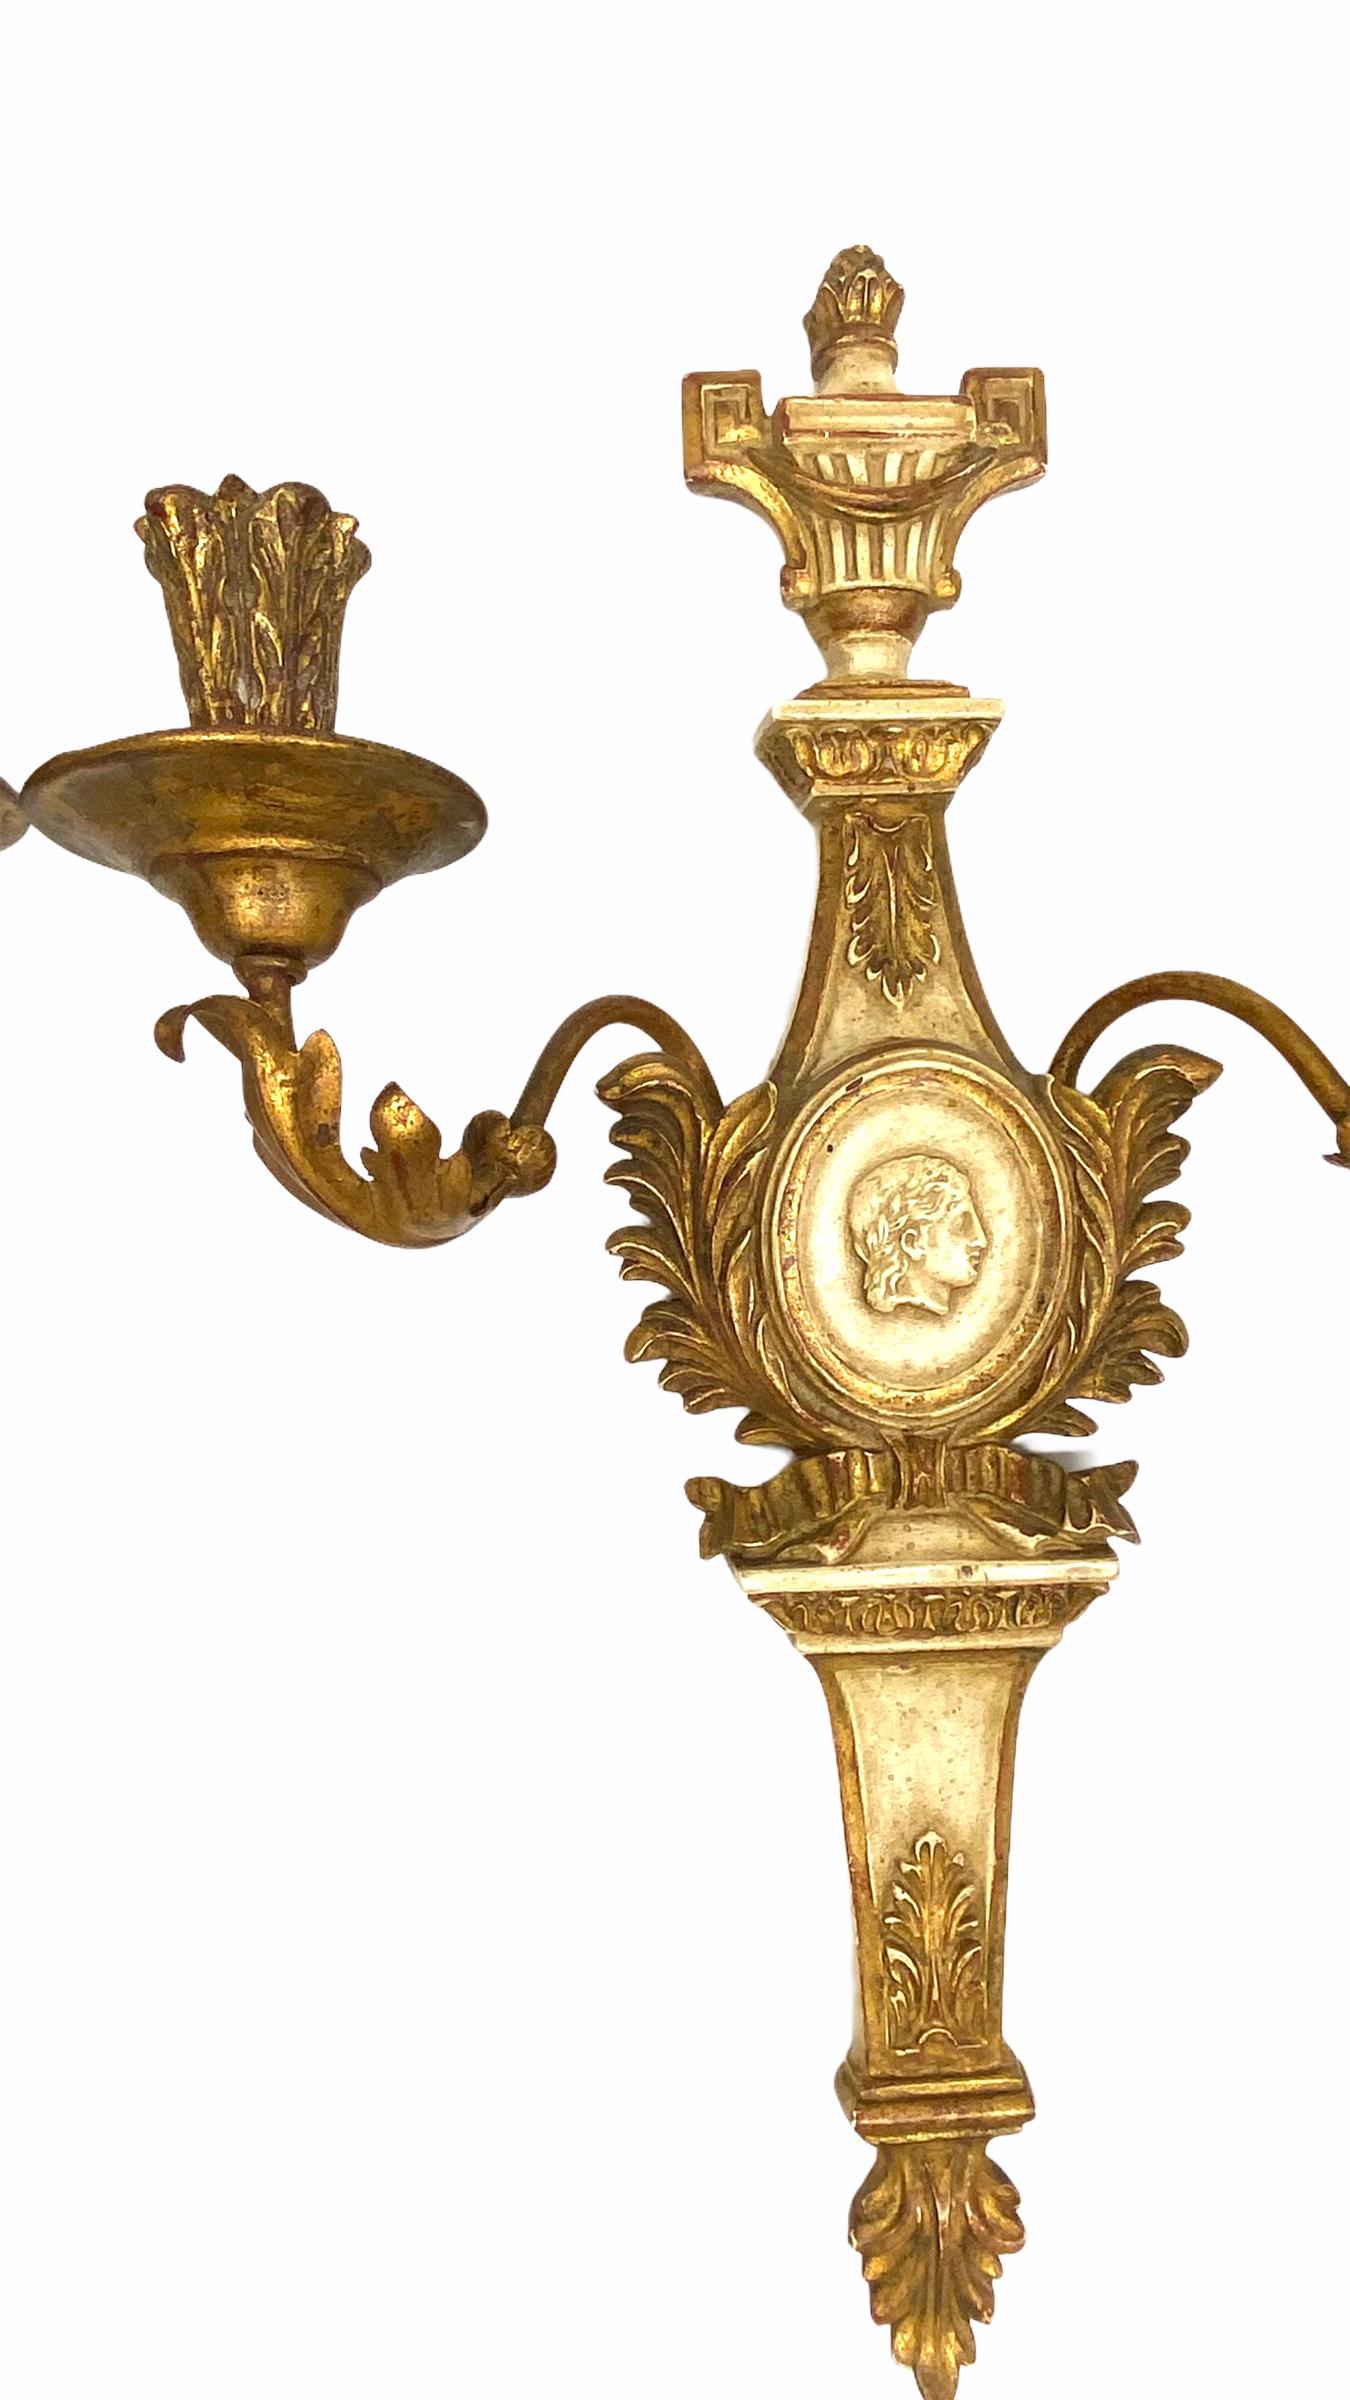 Pair of Monumental Empire Style Candle Wall Sconces Candlestick, Italy, 1970s For Sale 1